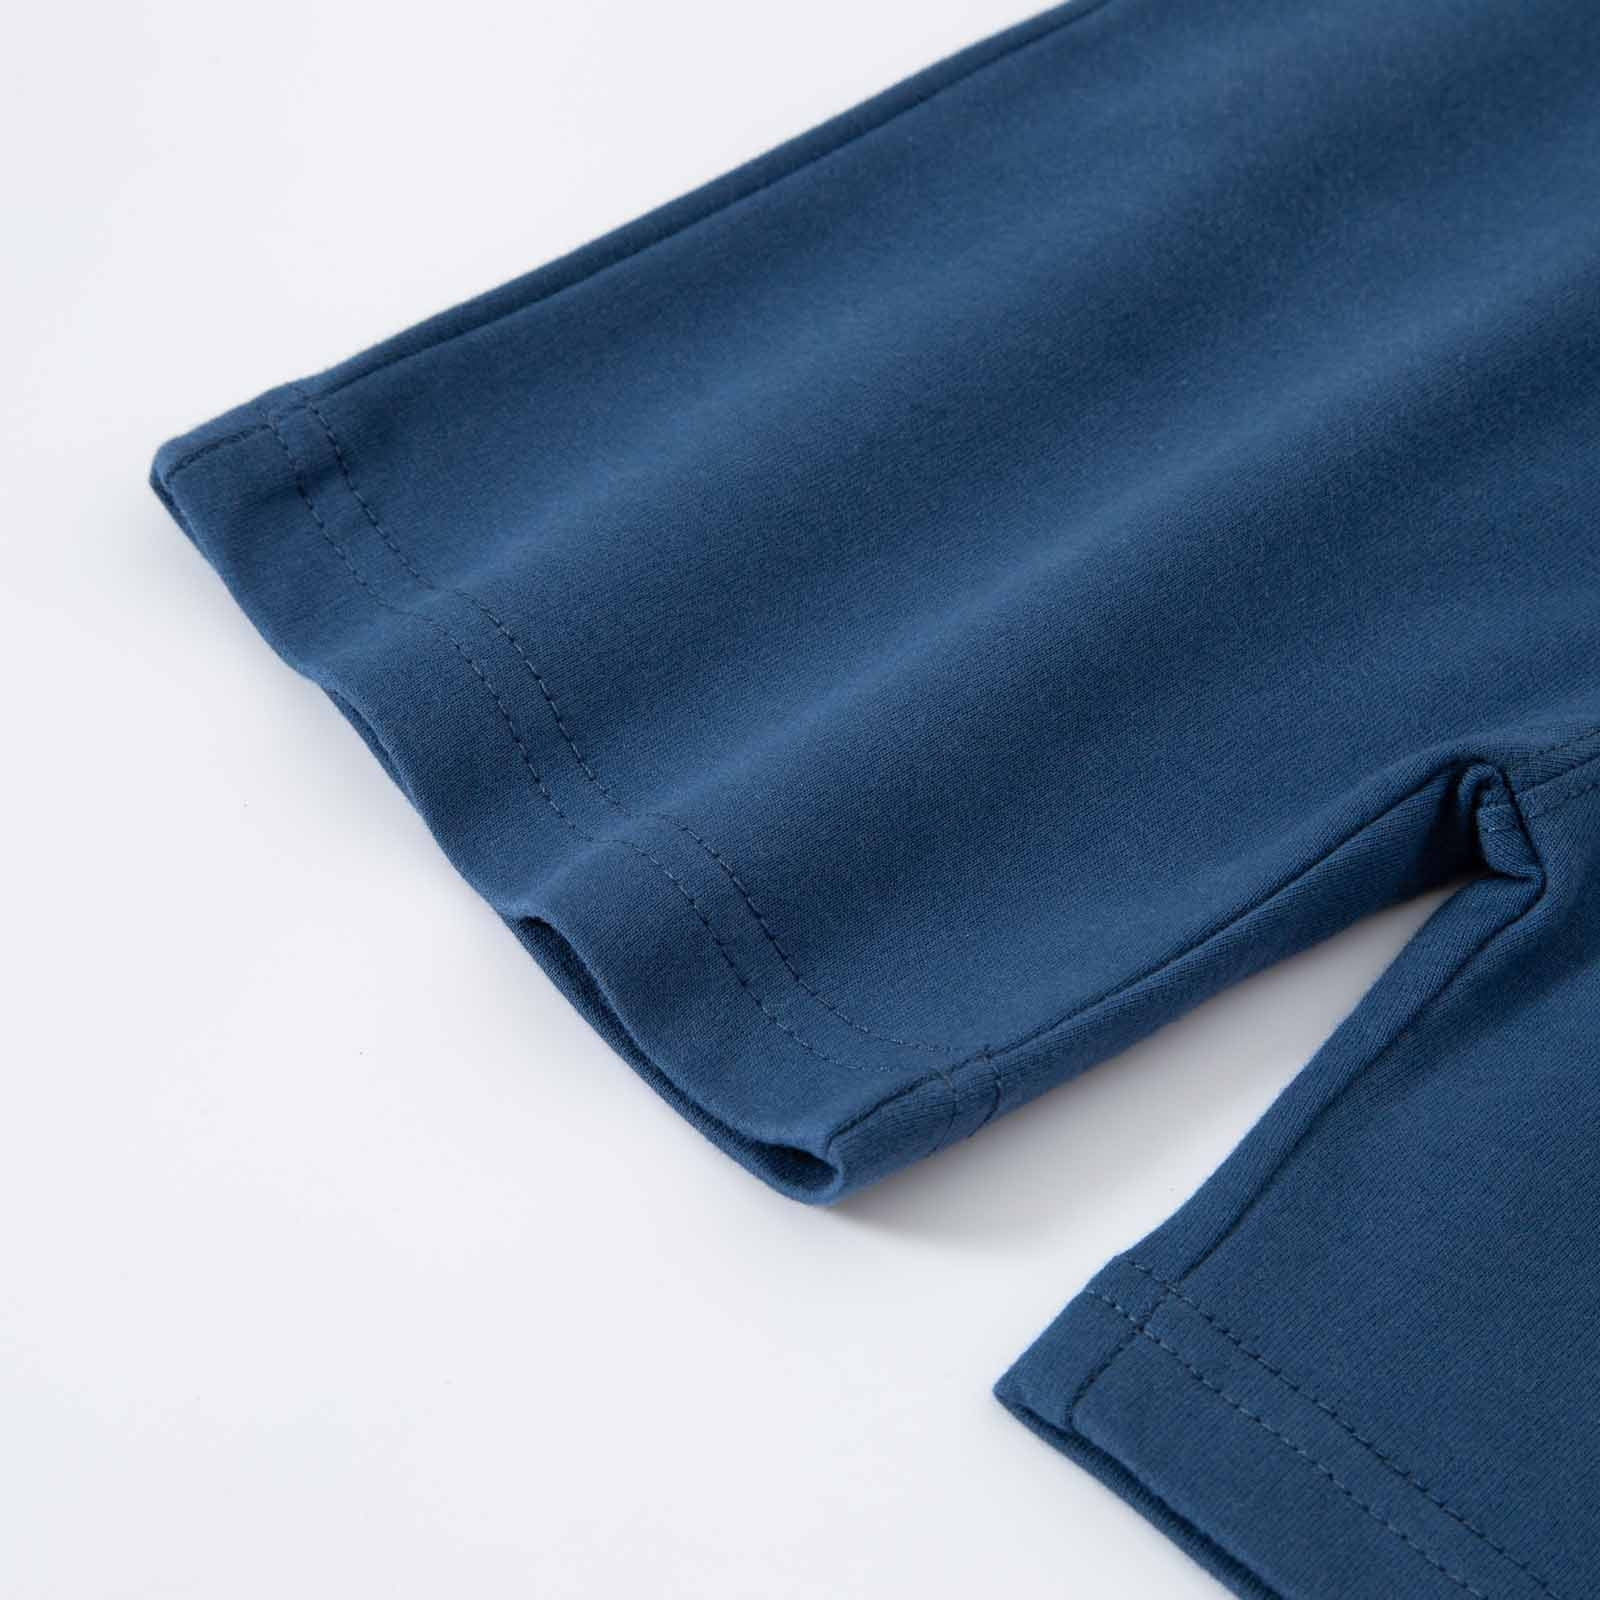 piuwrlz Pants for Kid/Toddler Boy Girls Solid Color Single Piece Short  Trousers Dark Blue Size 4-5Years 